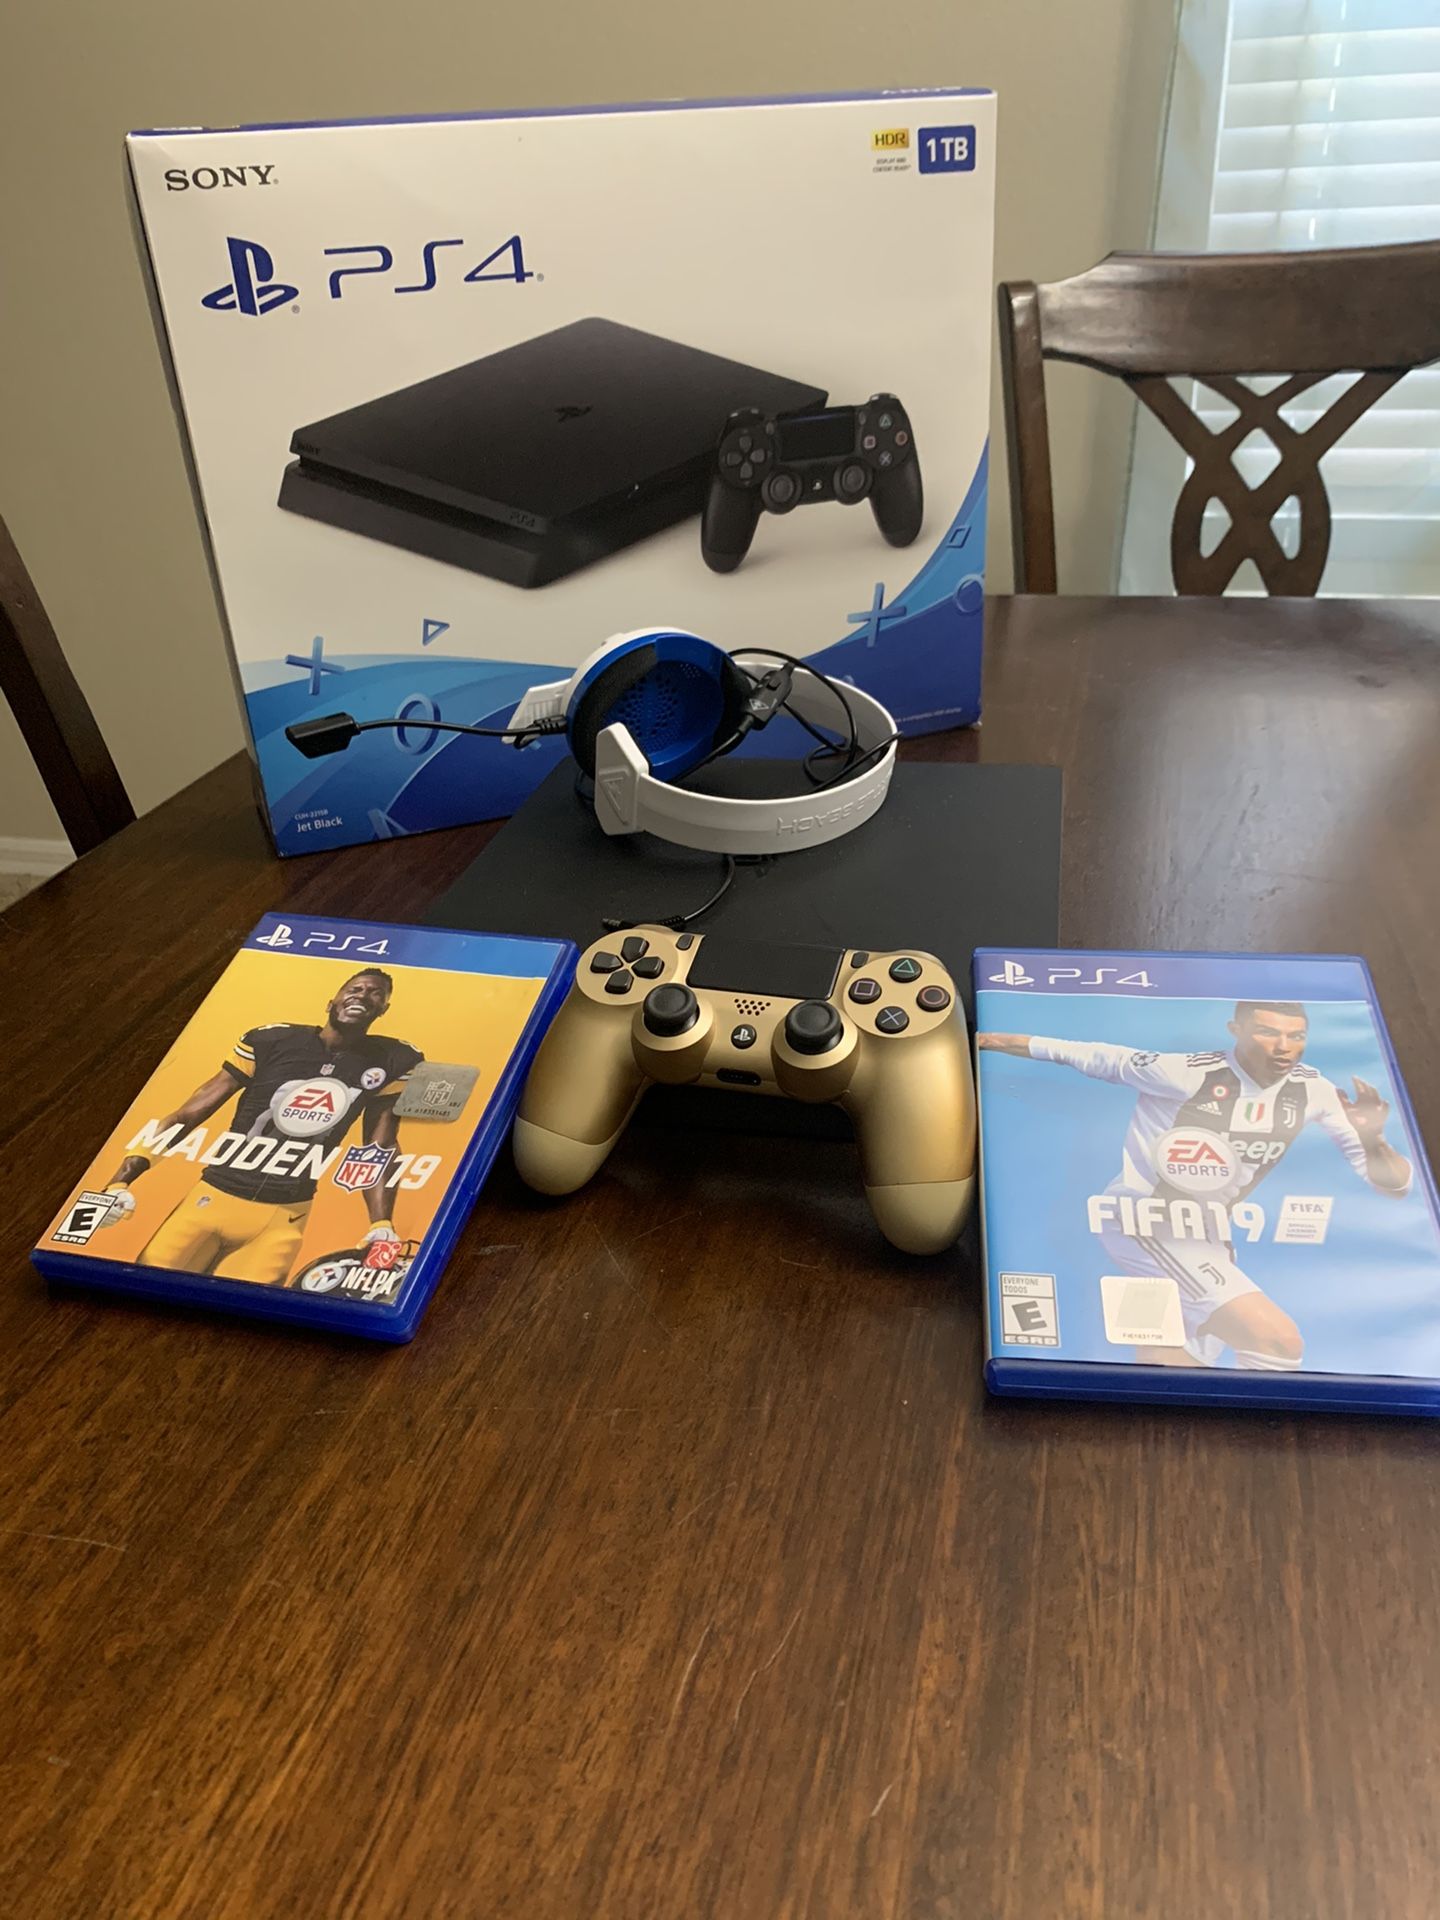 Ps4 slim 1tb with one controller turtle beach headphones and 2 games